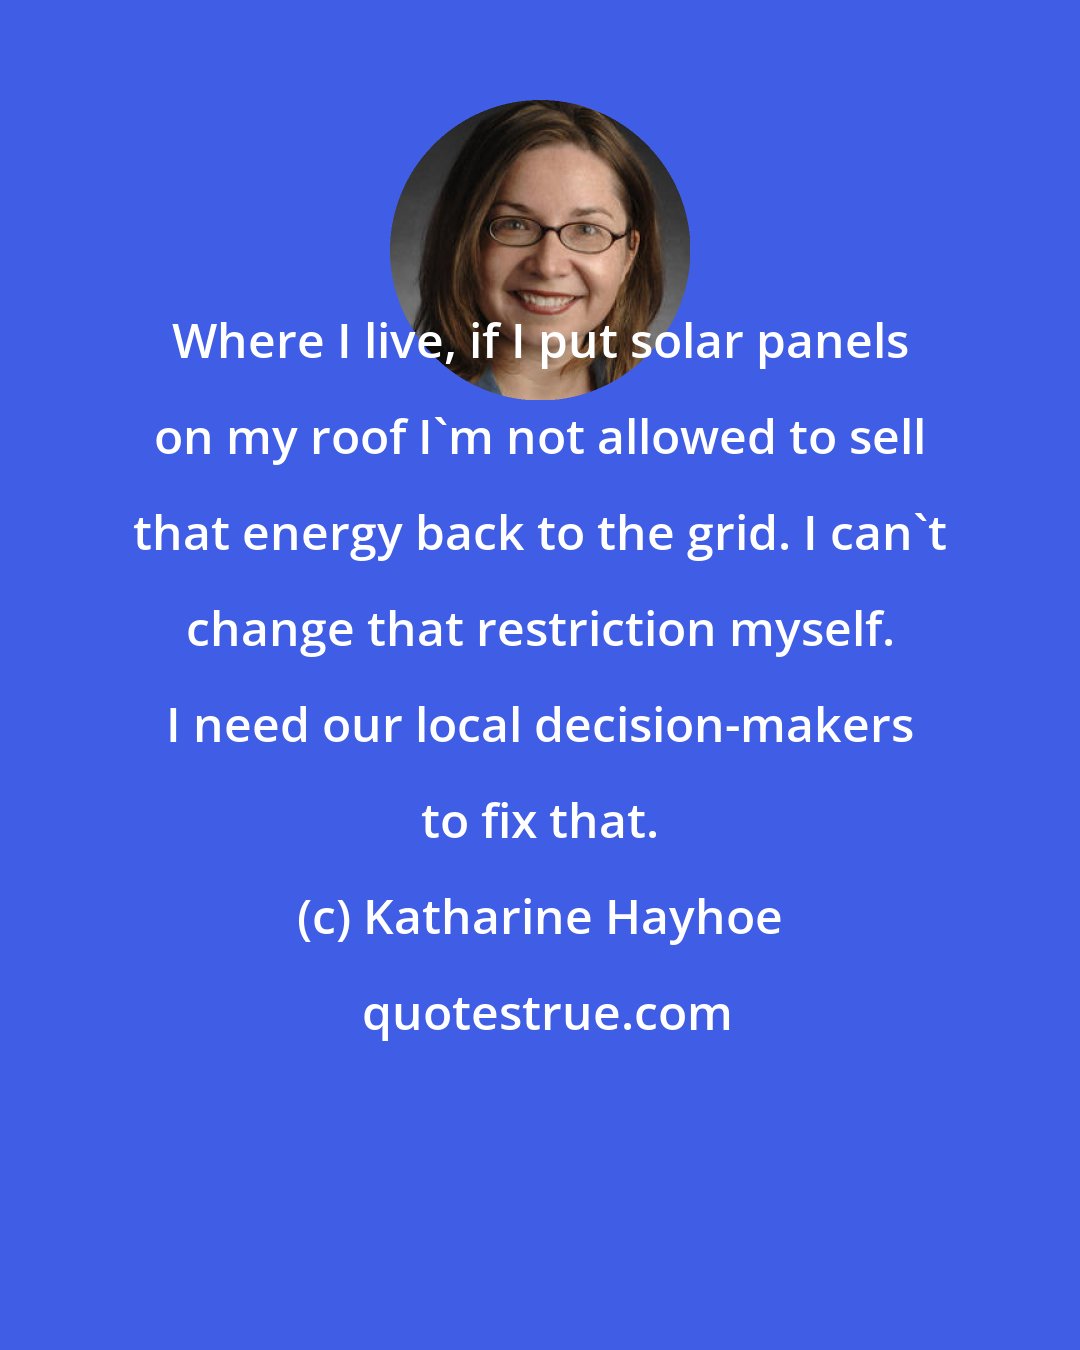 Katharine Hayhoe: Where I live, if I put solar panels on my roof I'm not allowed to sell that energy back to the grid. I can't change that restriction myself. I need our local decision-makers to fix that.